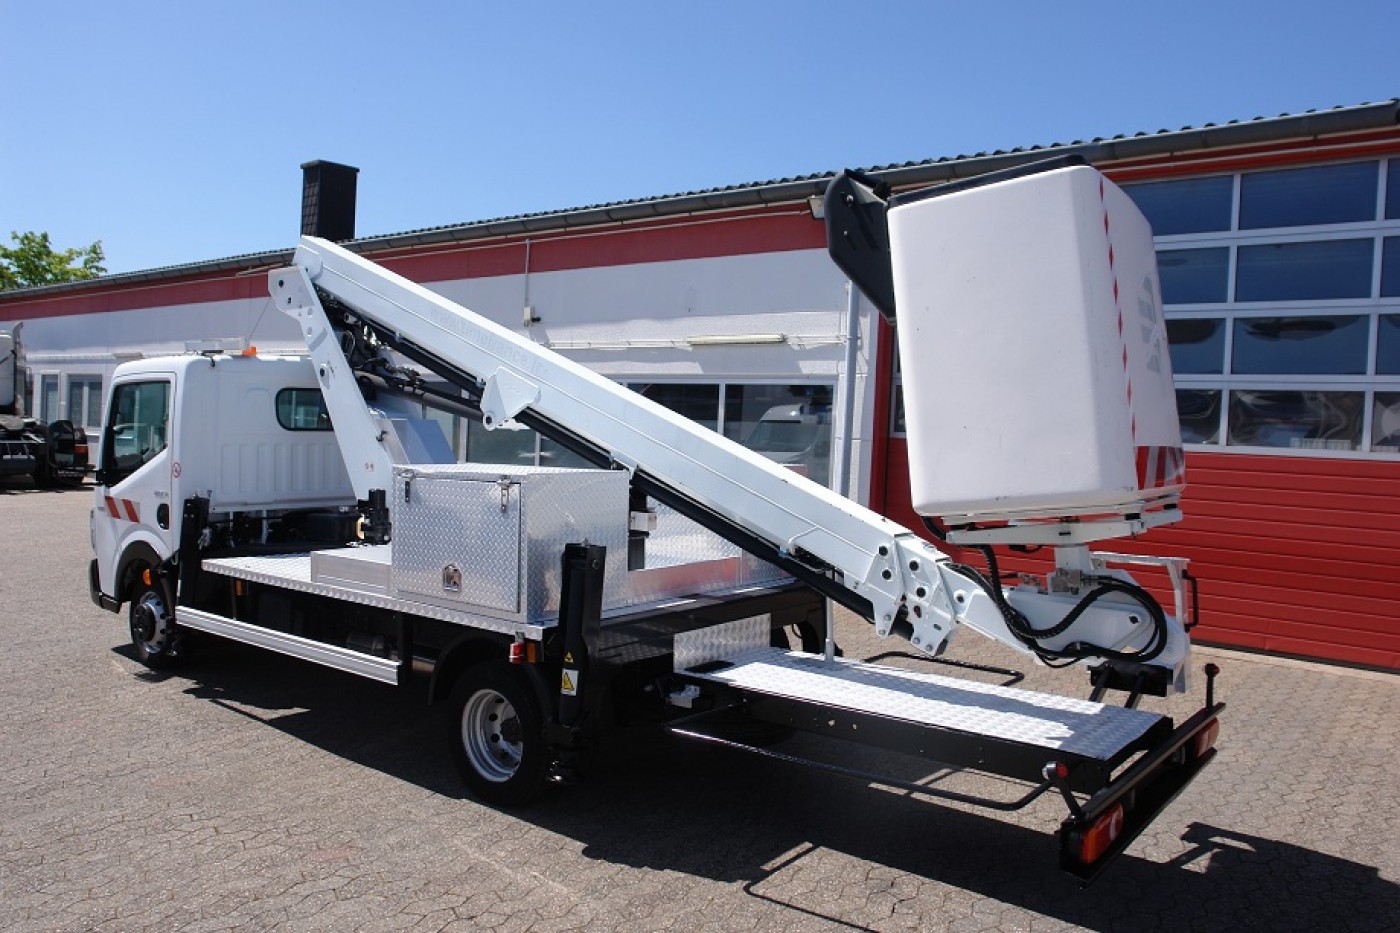 Renault Maxity 120.35 arial working lift VT-55-NE 18m / 2 person basket 200kg / air conditioning / EURO5 TÜV UVV new !